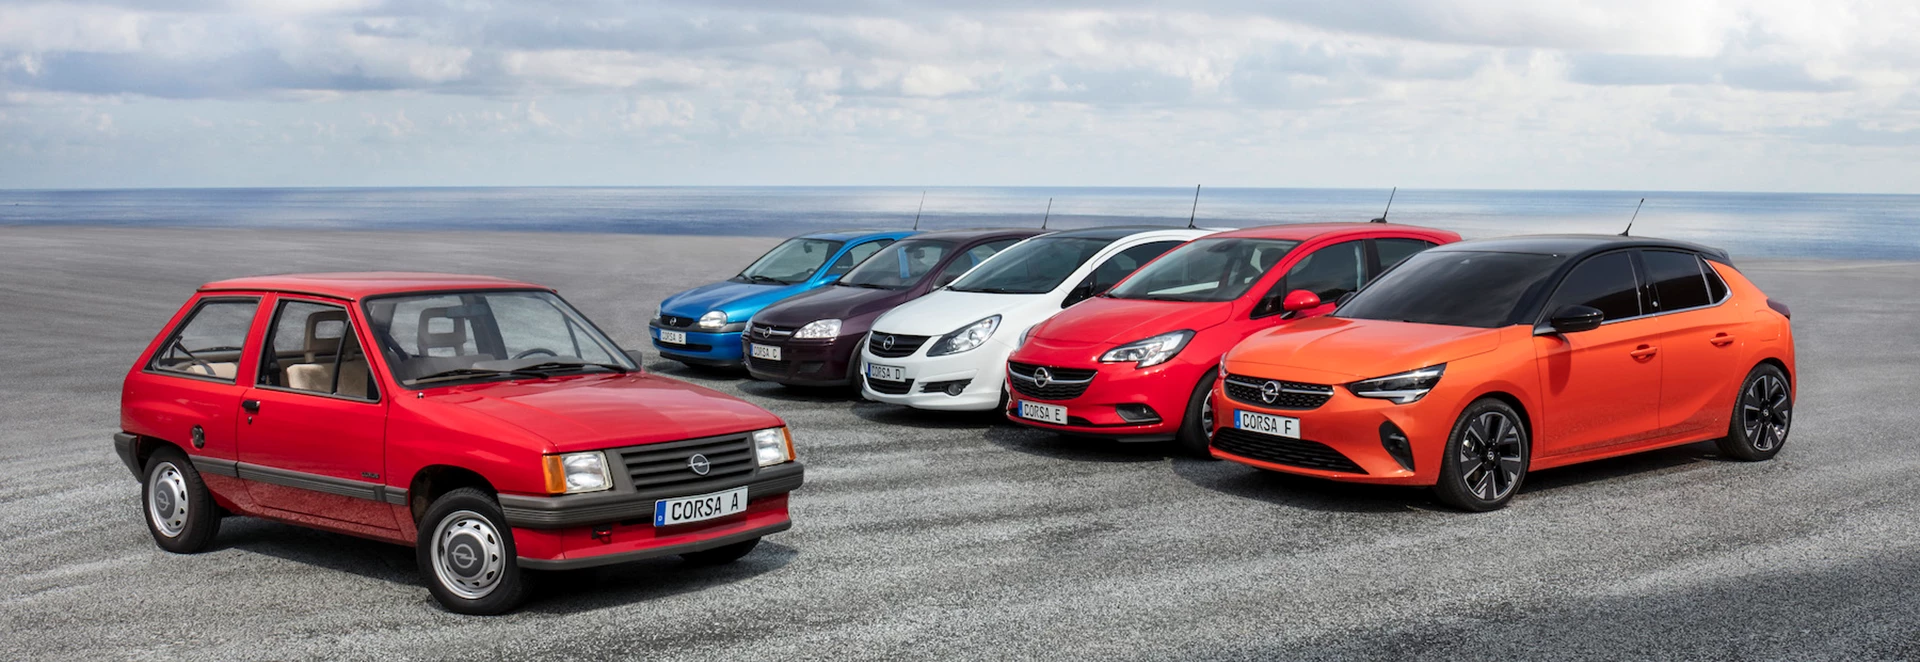 Vauxhall Corsa at 40: A history of this popular supermini 